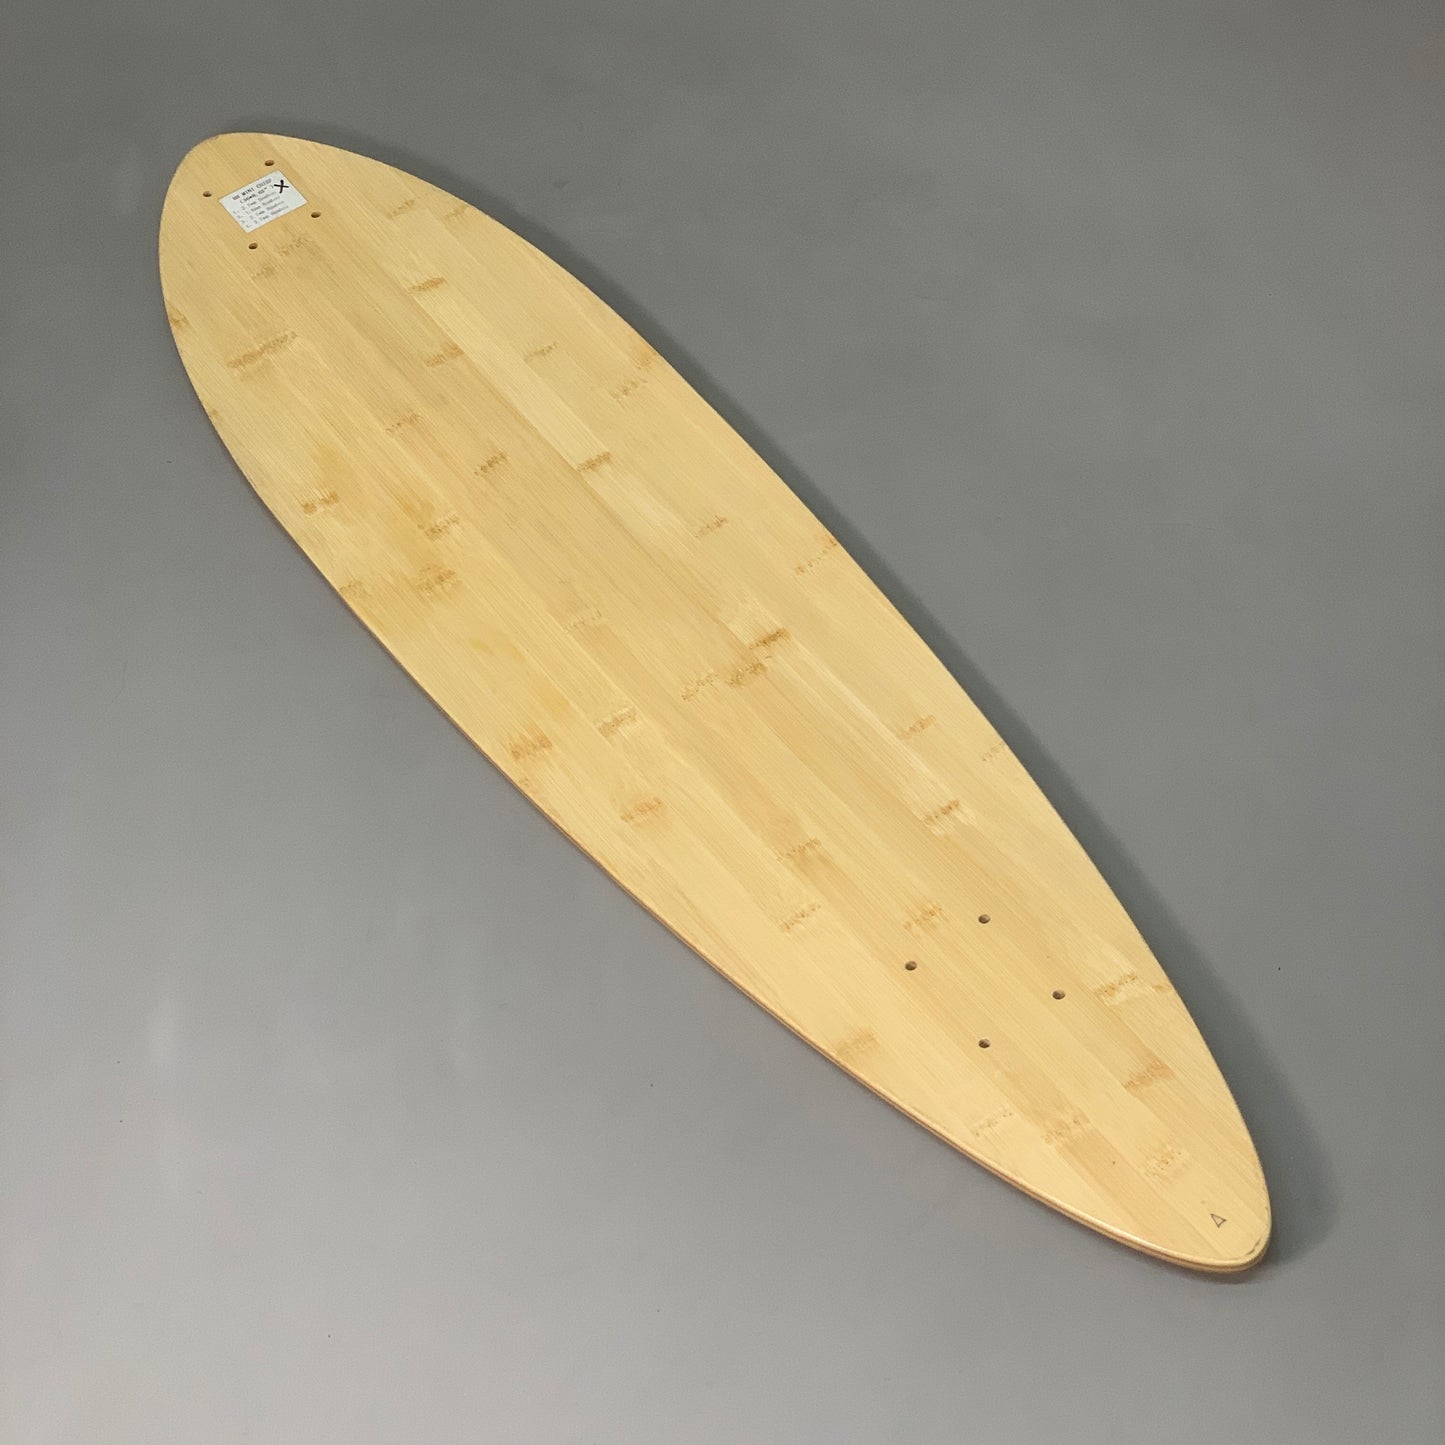 LAND YACHTZ Fire Tree Pintail Longboard Canadian Maple 36"x8.5" (New Other)